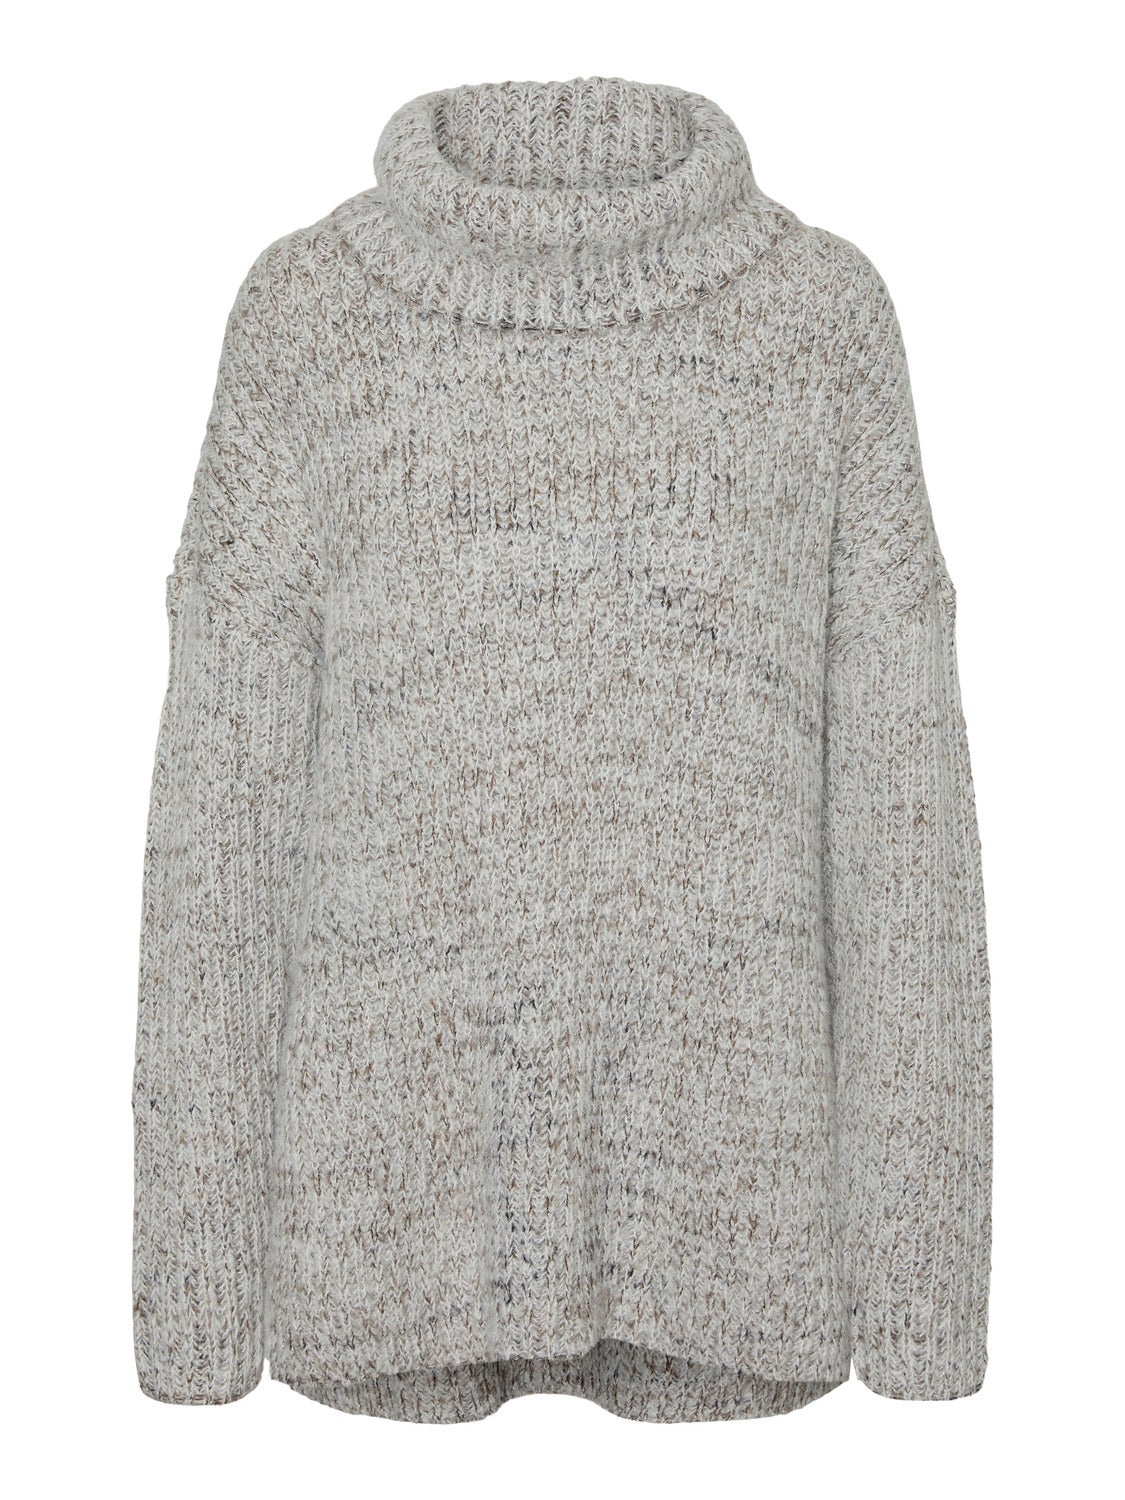 Knit Pullover - Ready-to-Wear 1AC4BK